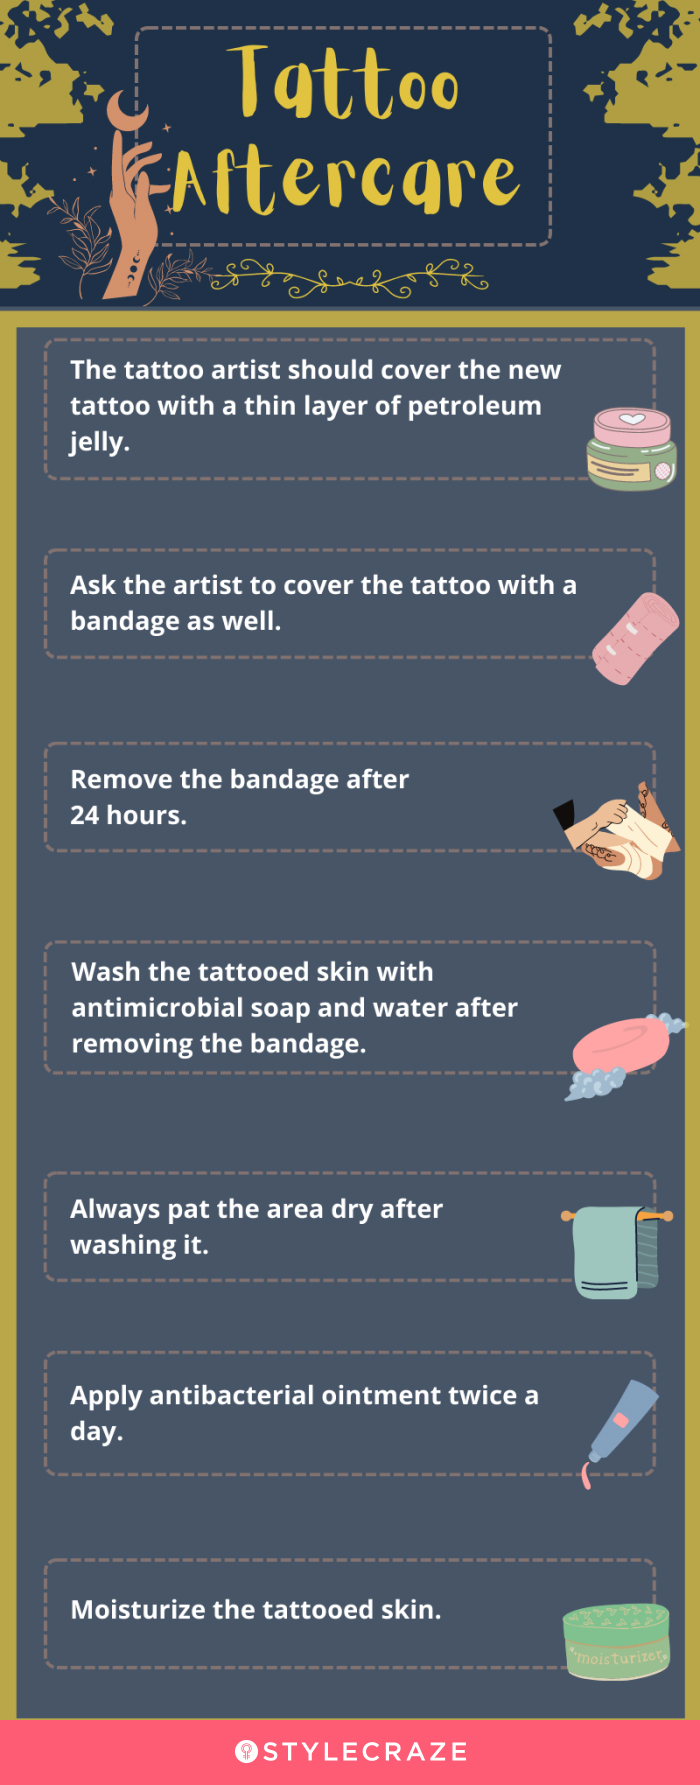 tattoo aftercare tips (infographic)